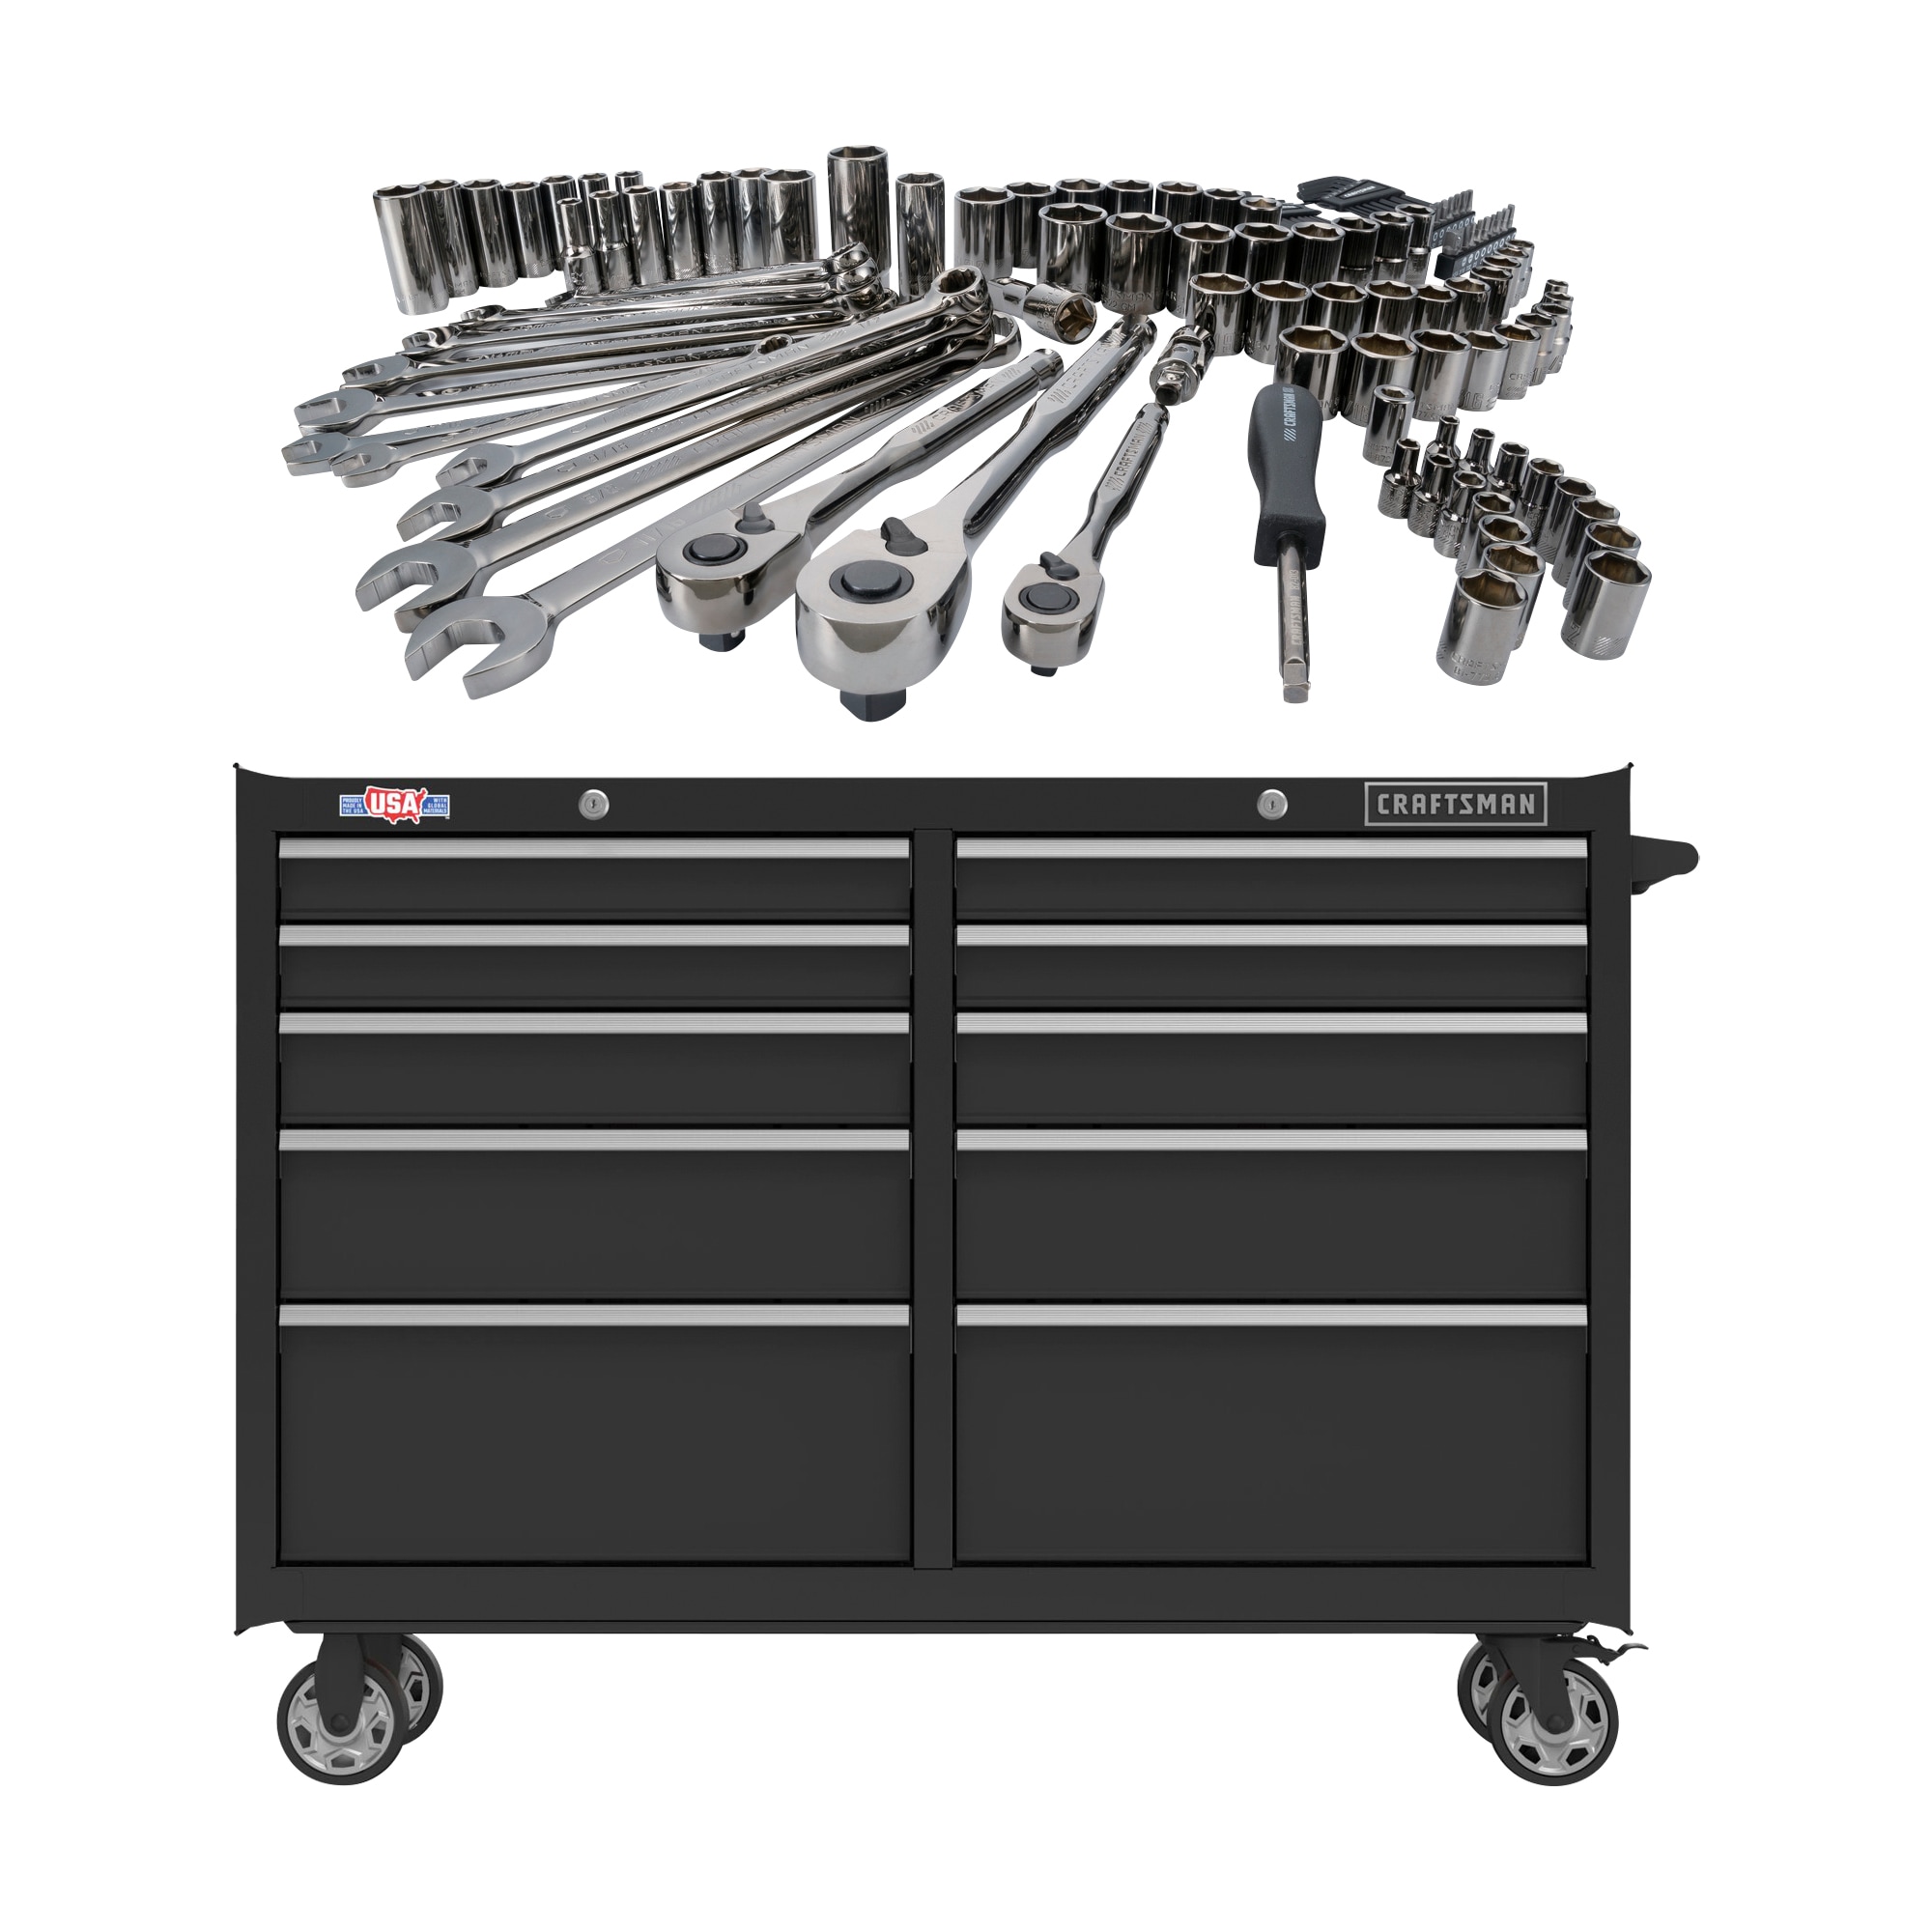 CRAFTSMAN 2000 Series 52-in W x 37.5-in H 10-Drawer Steel Rolling Tool Cabinet (Black) & 121-Piece Standard (SAE) and Metric Combination Gunmetal